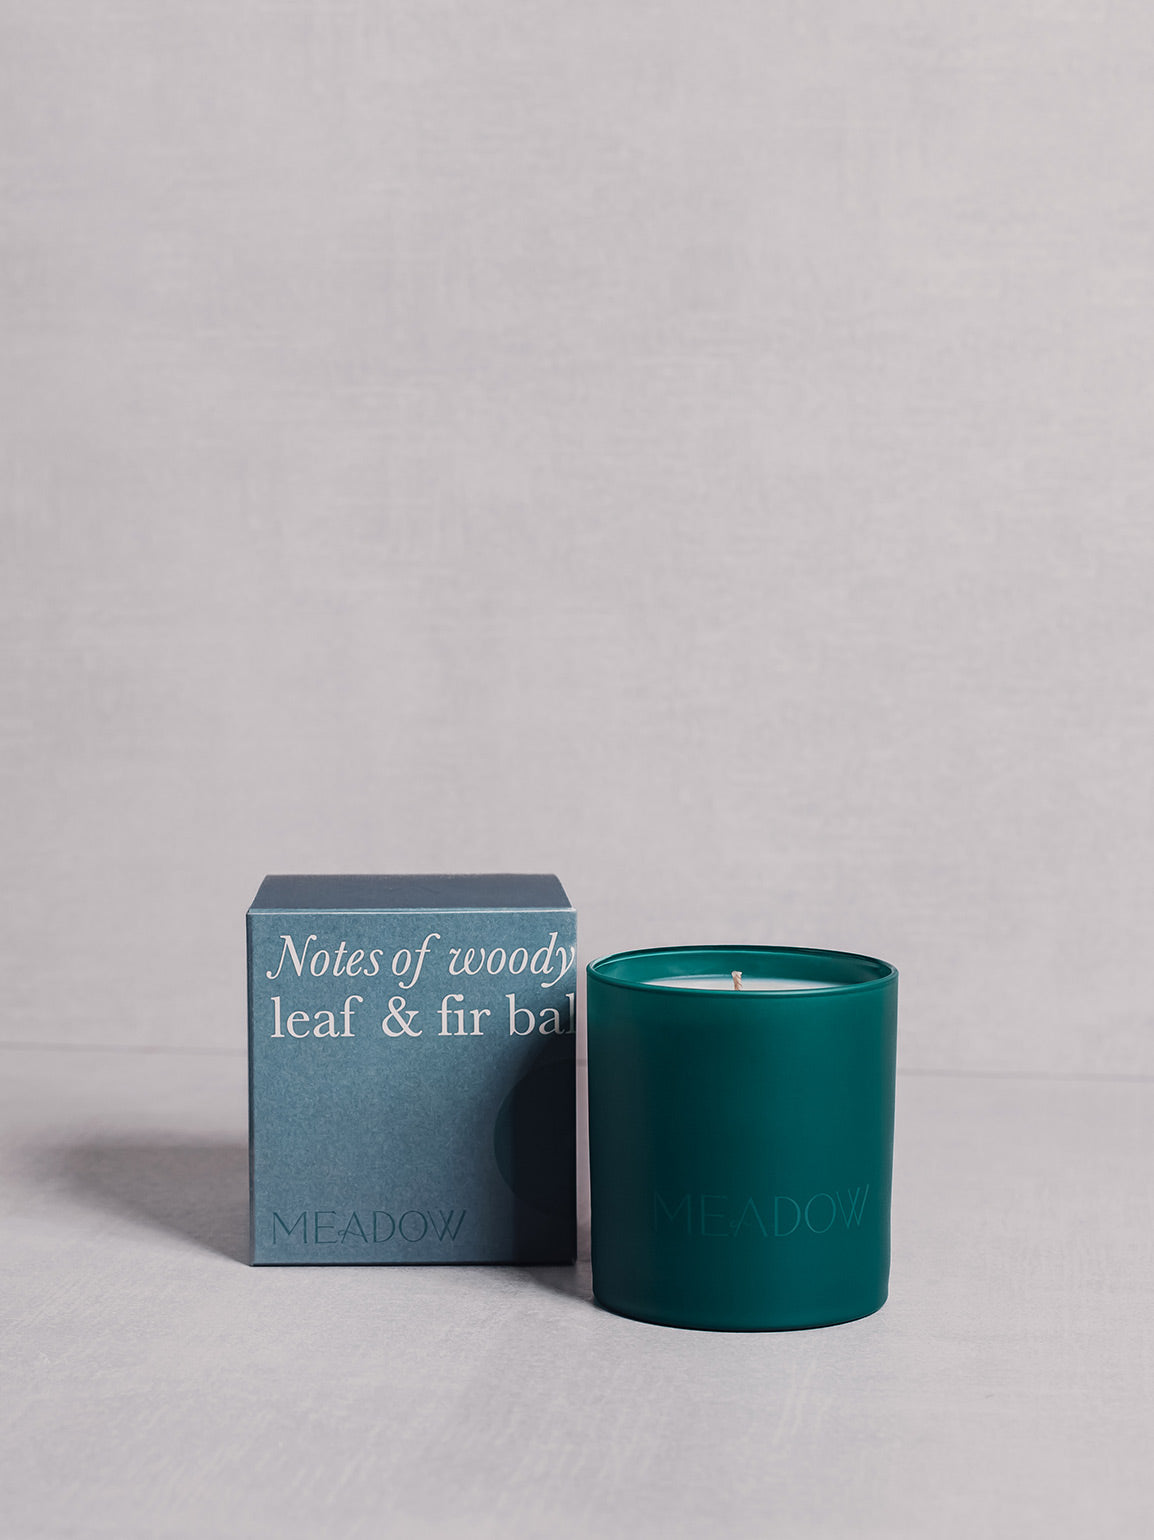 Notes of Woody - Meadow - Candles, Home & Stationery, Notes of Woody